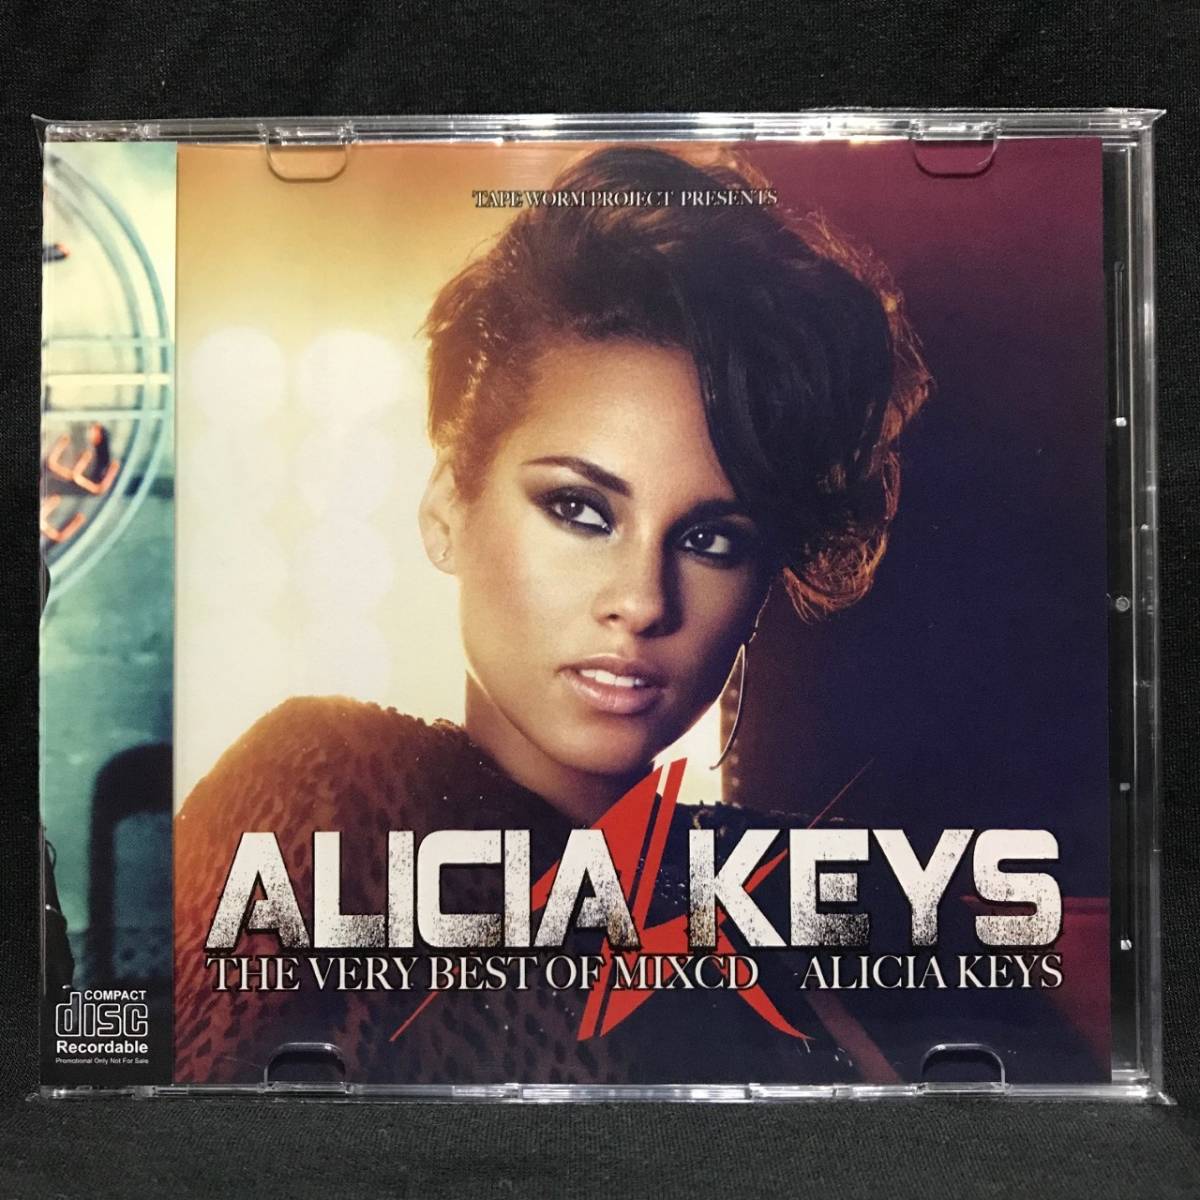 ・Alicia Keys The Very Best MixCD アリシア キーズ【25曲収録】新品